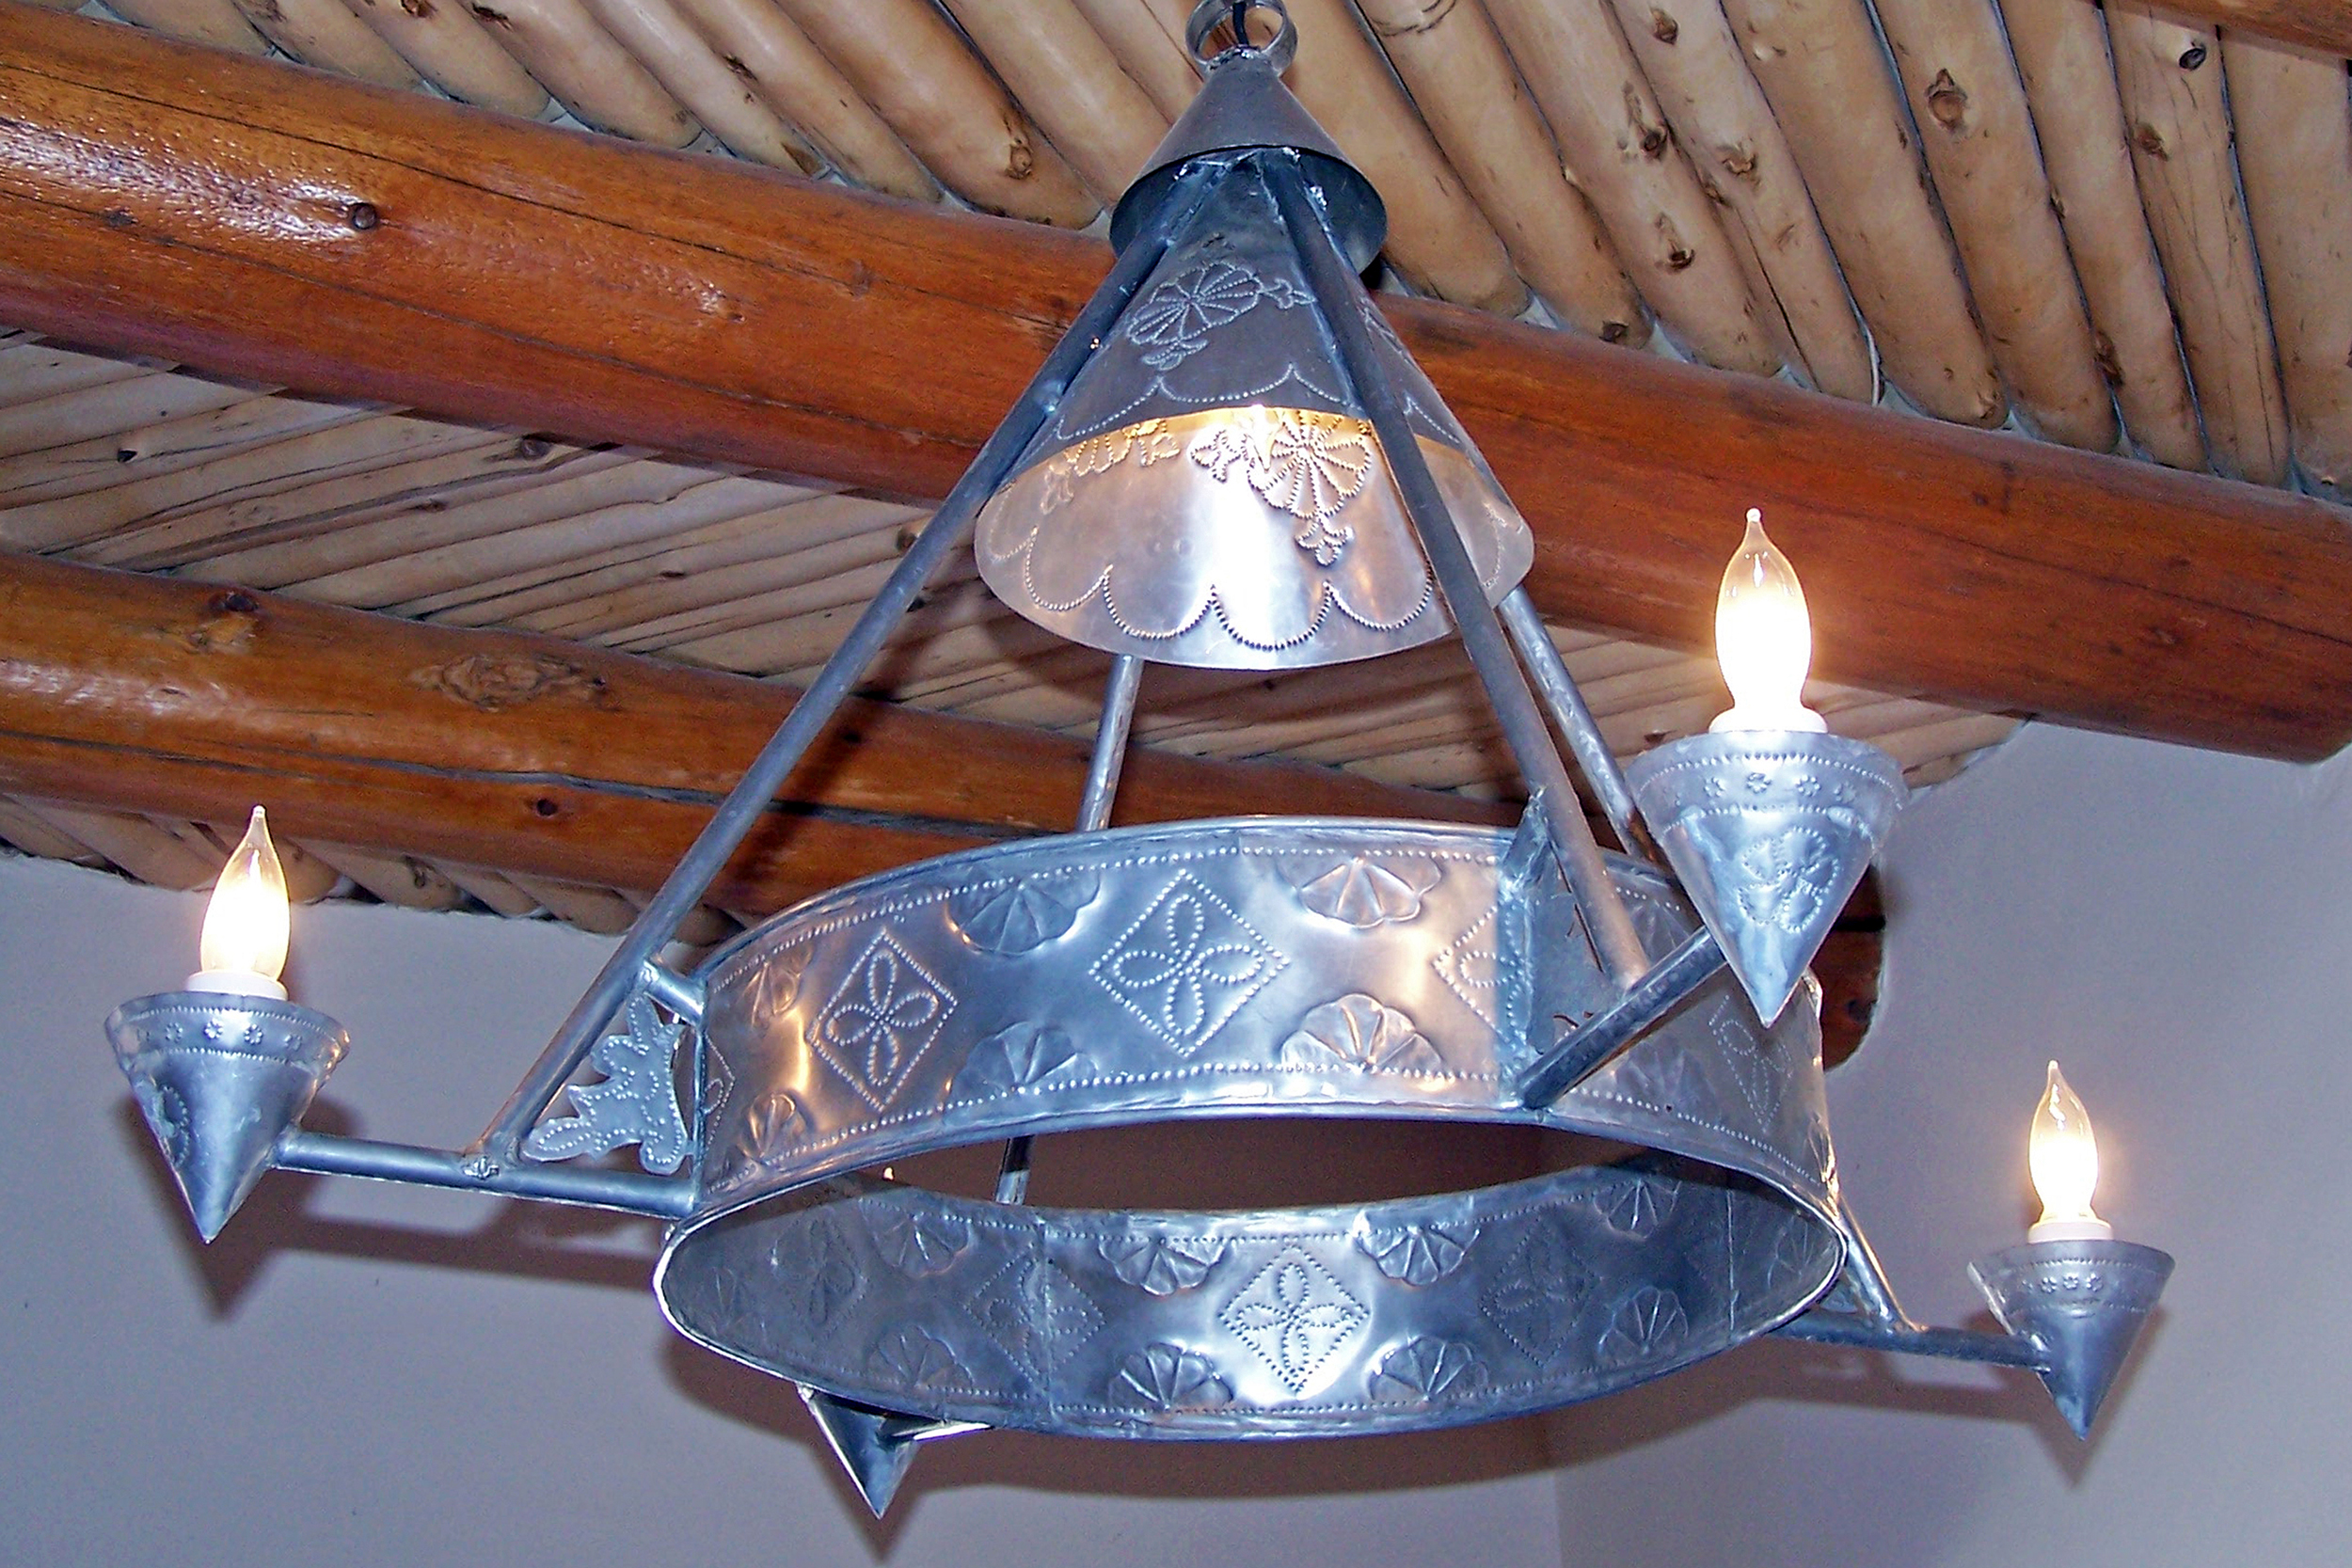 handmade Spanish colonial style punched tin light fixtures were made by the CCC